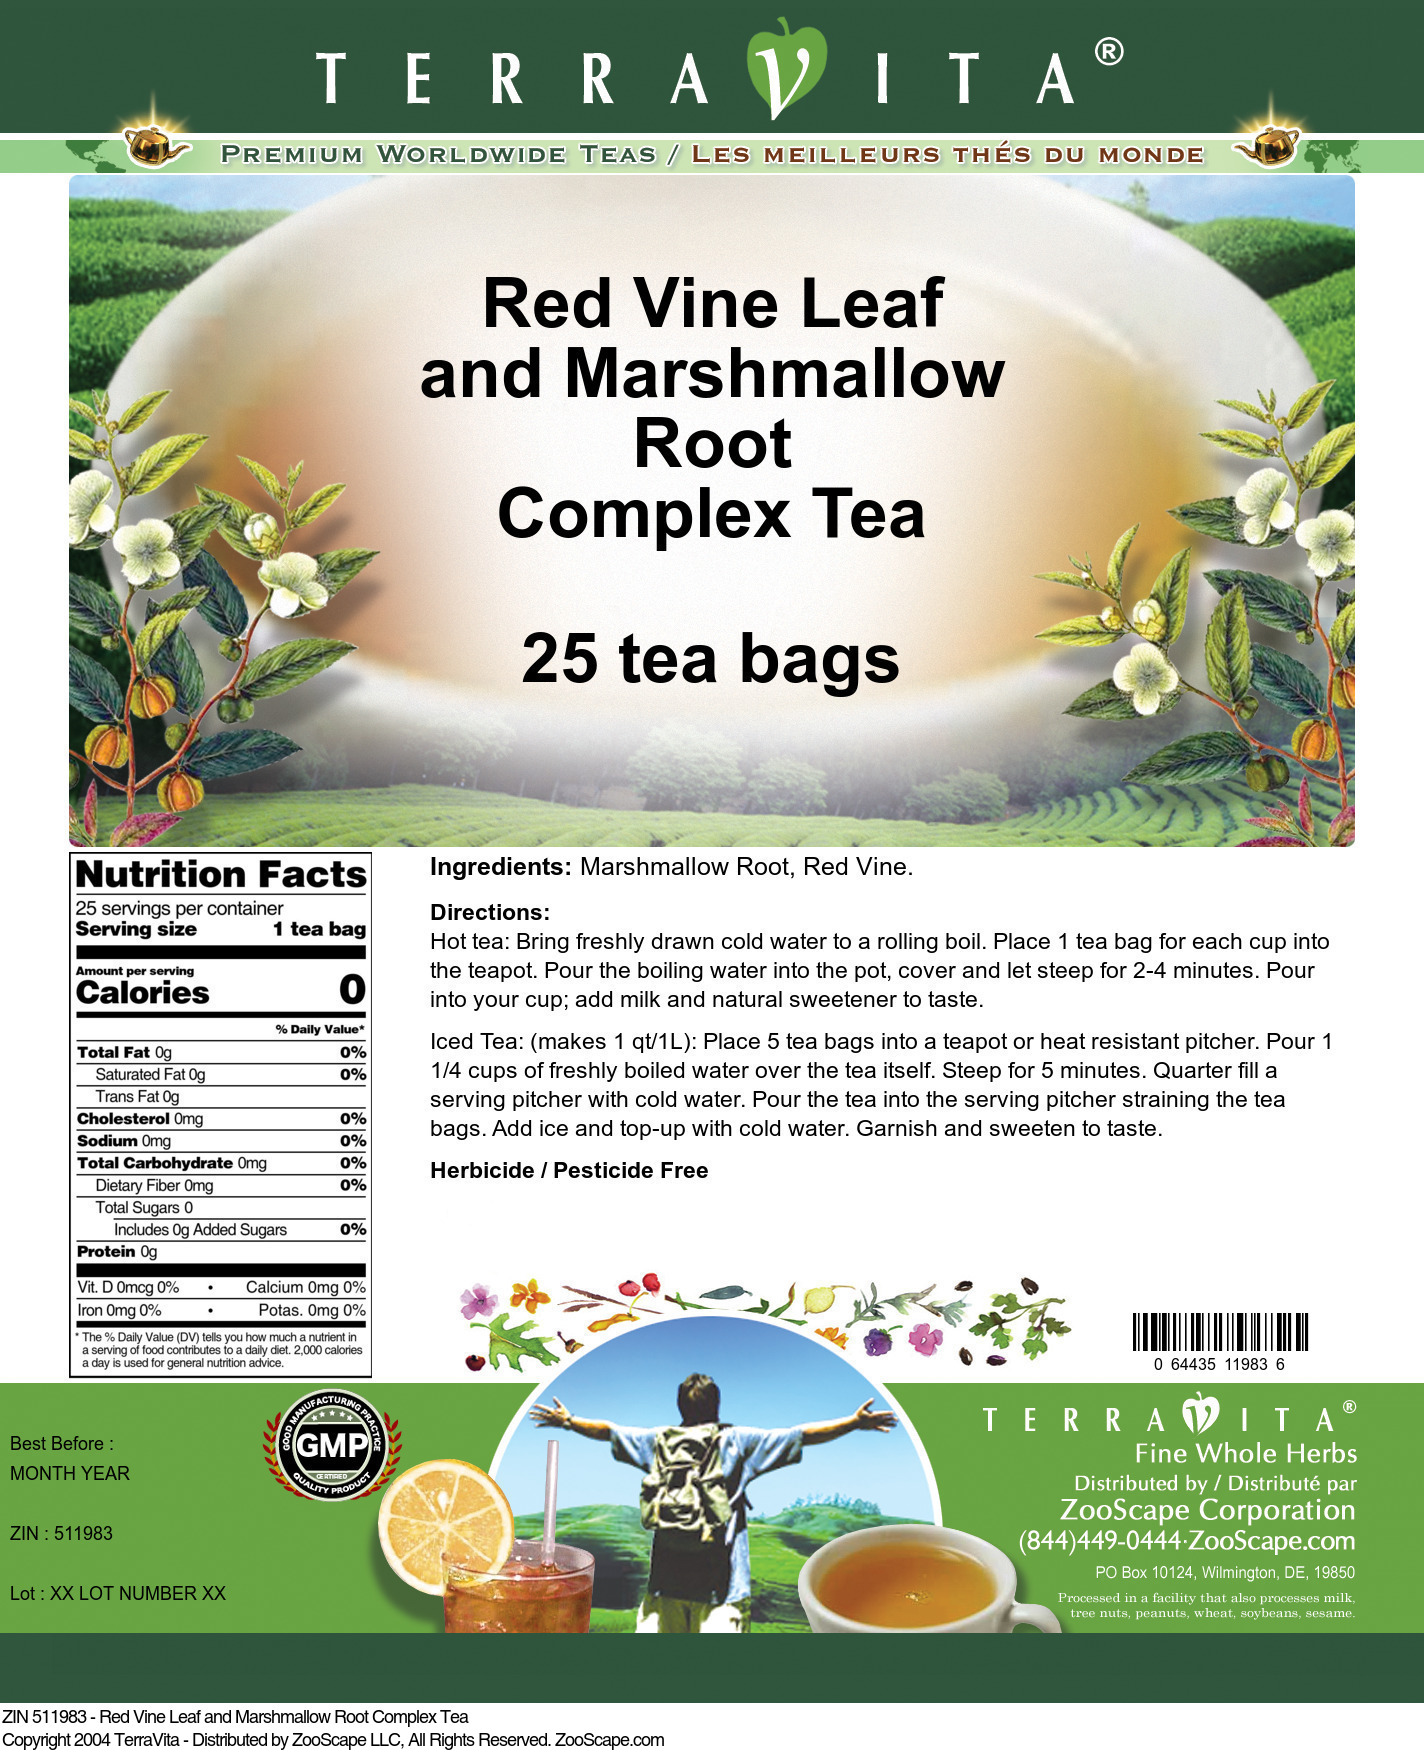 Red Vine Leaf and Marshmallow Root Complex Tea - Label